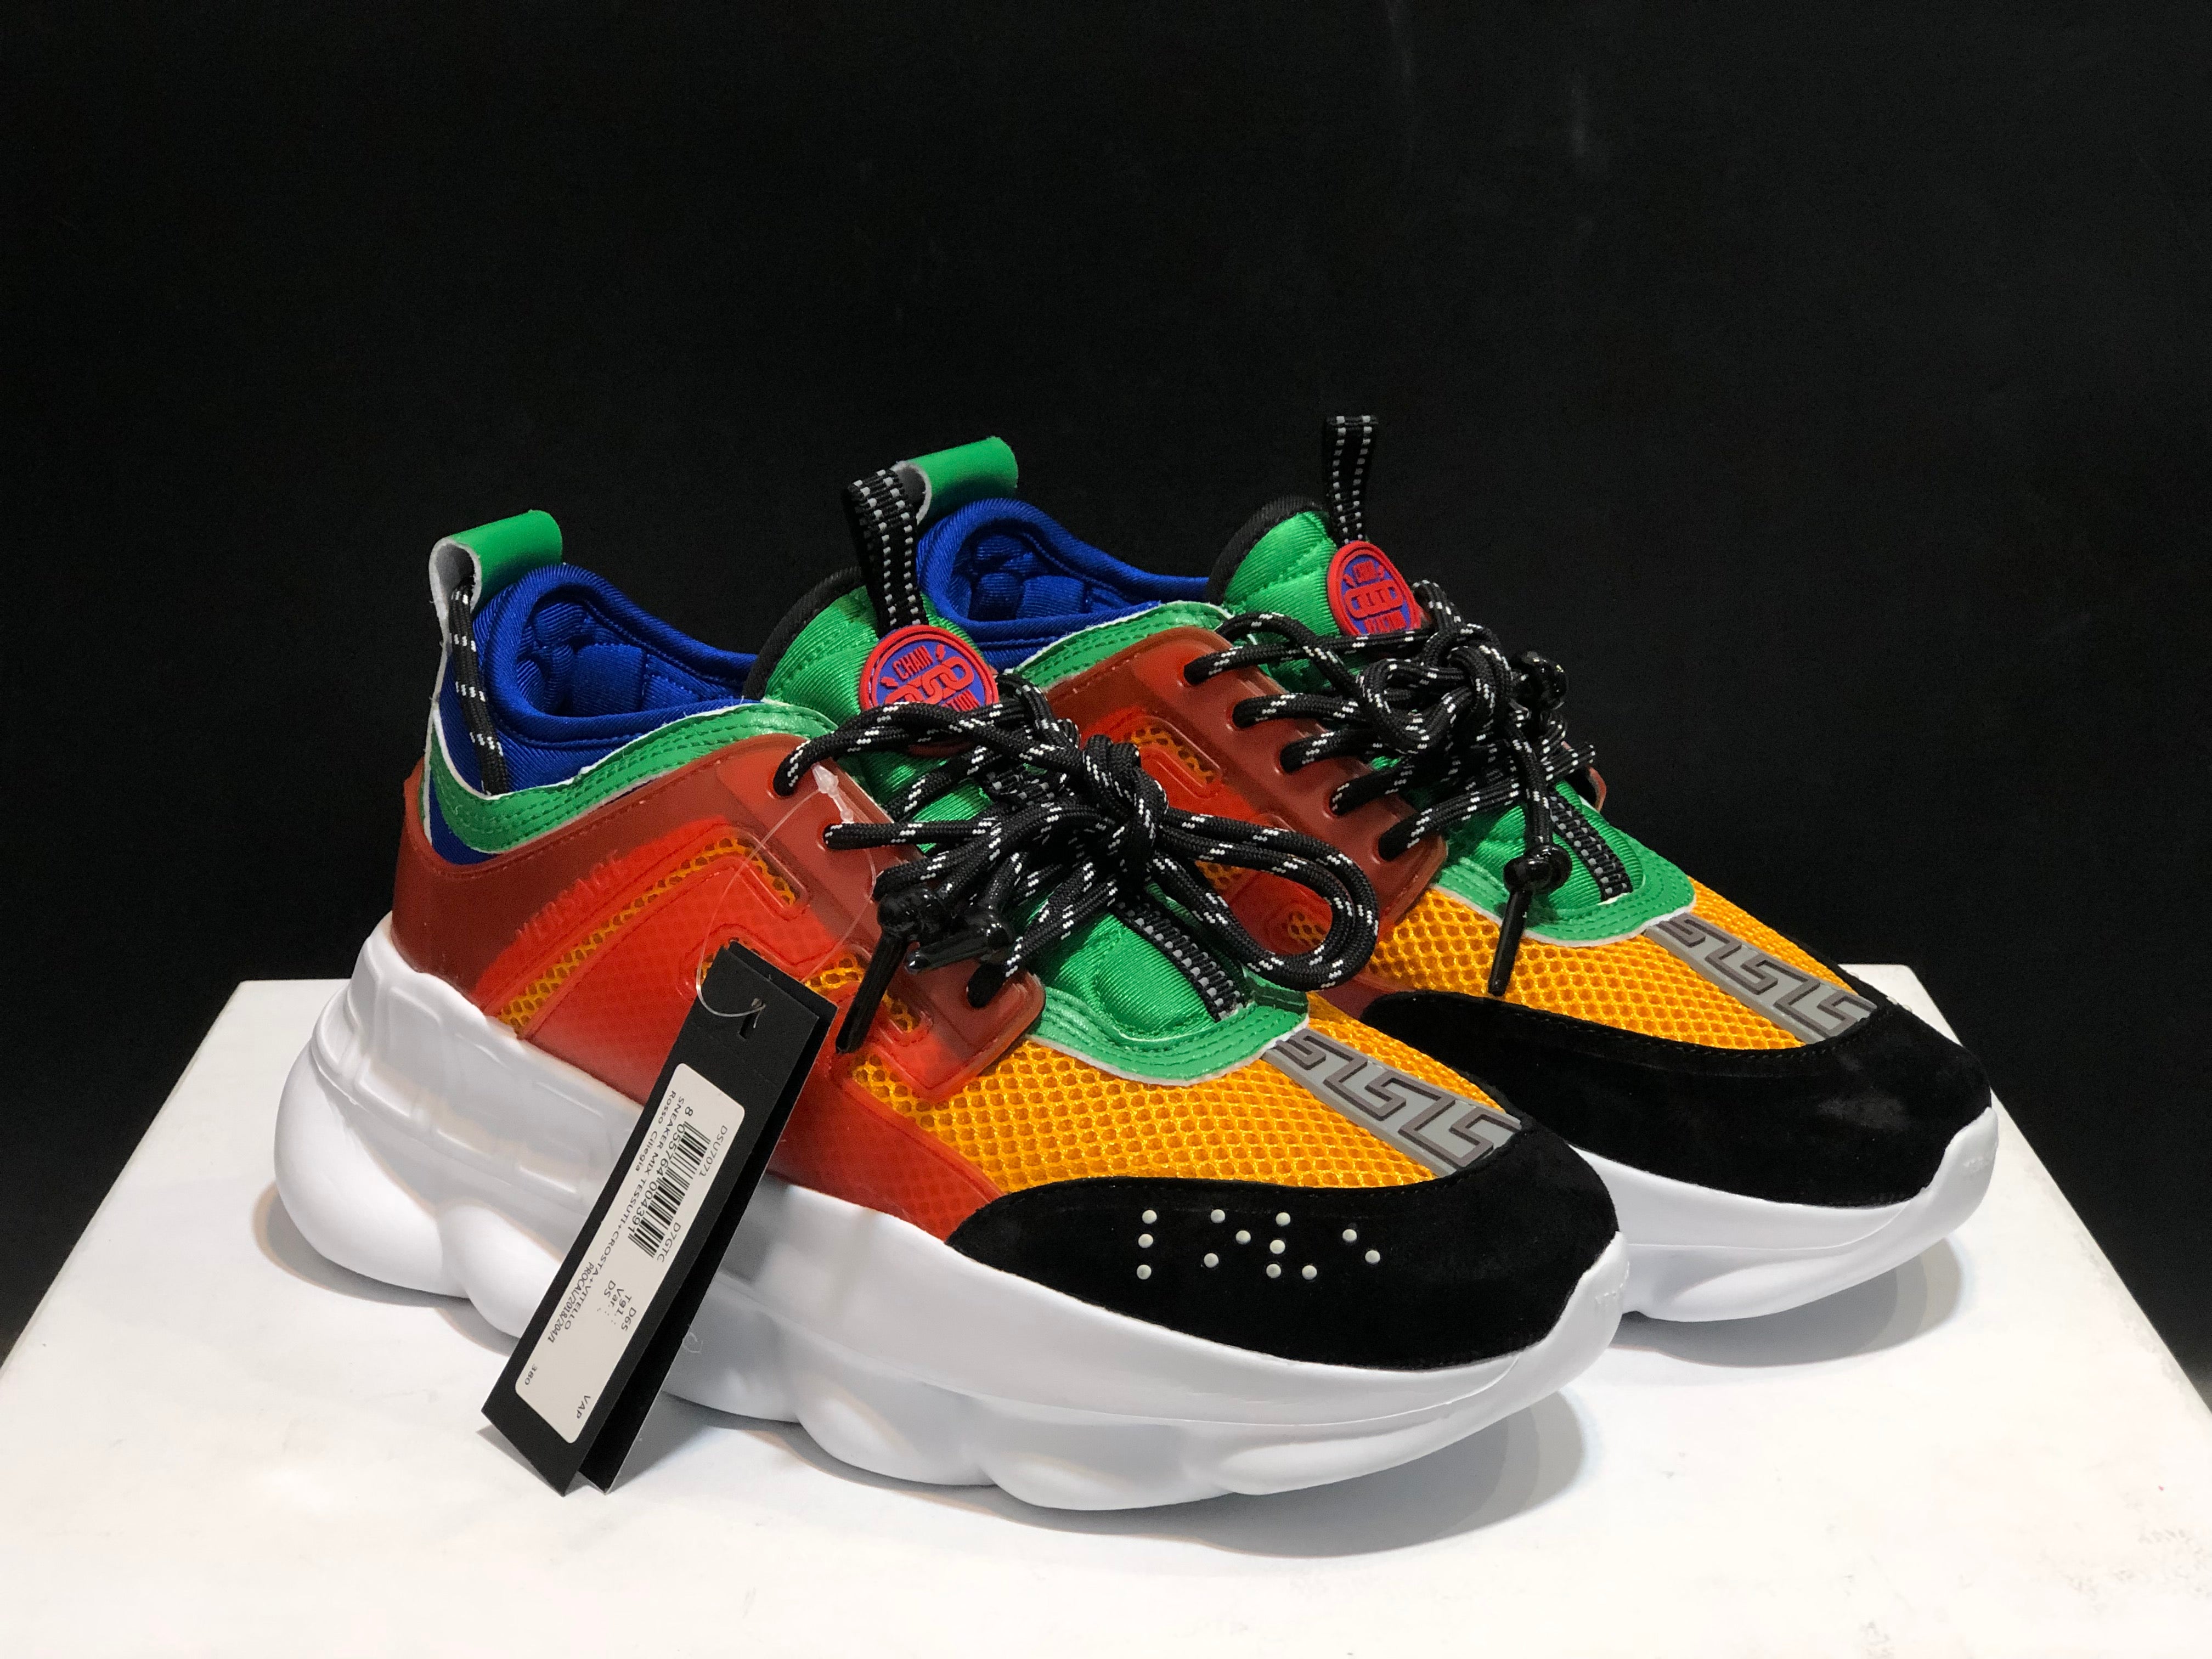 Versace Leisure sports shoes